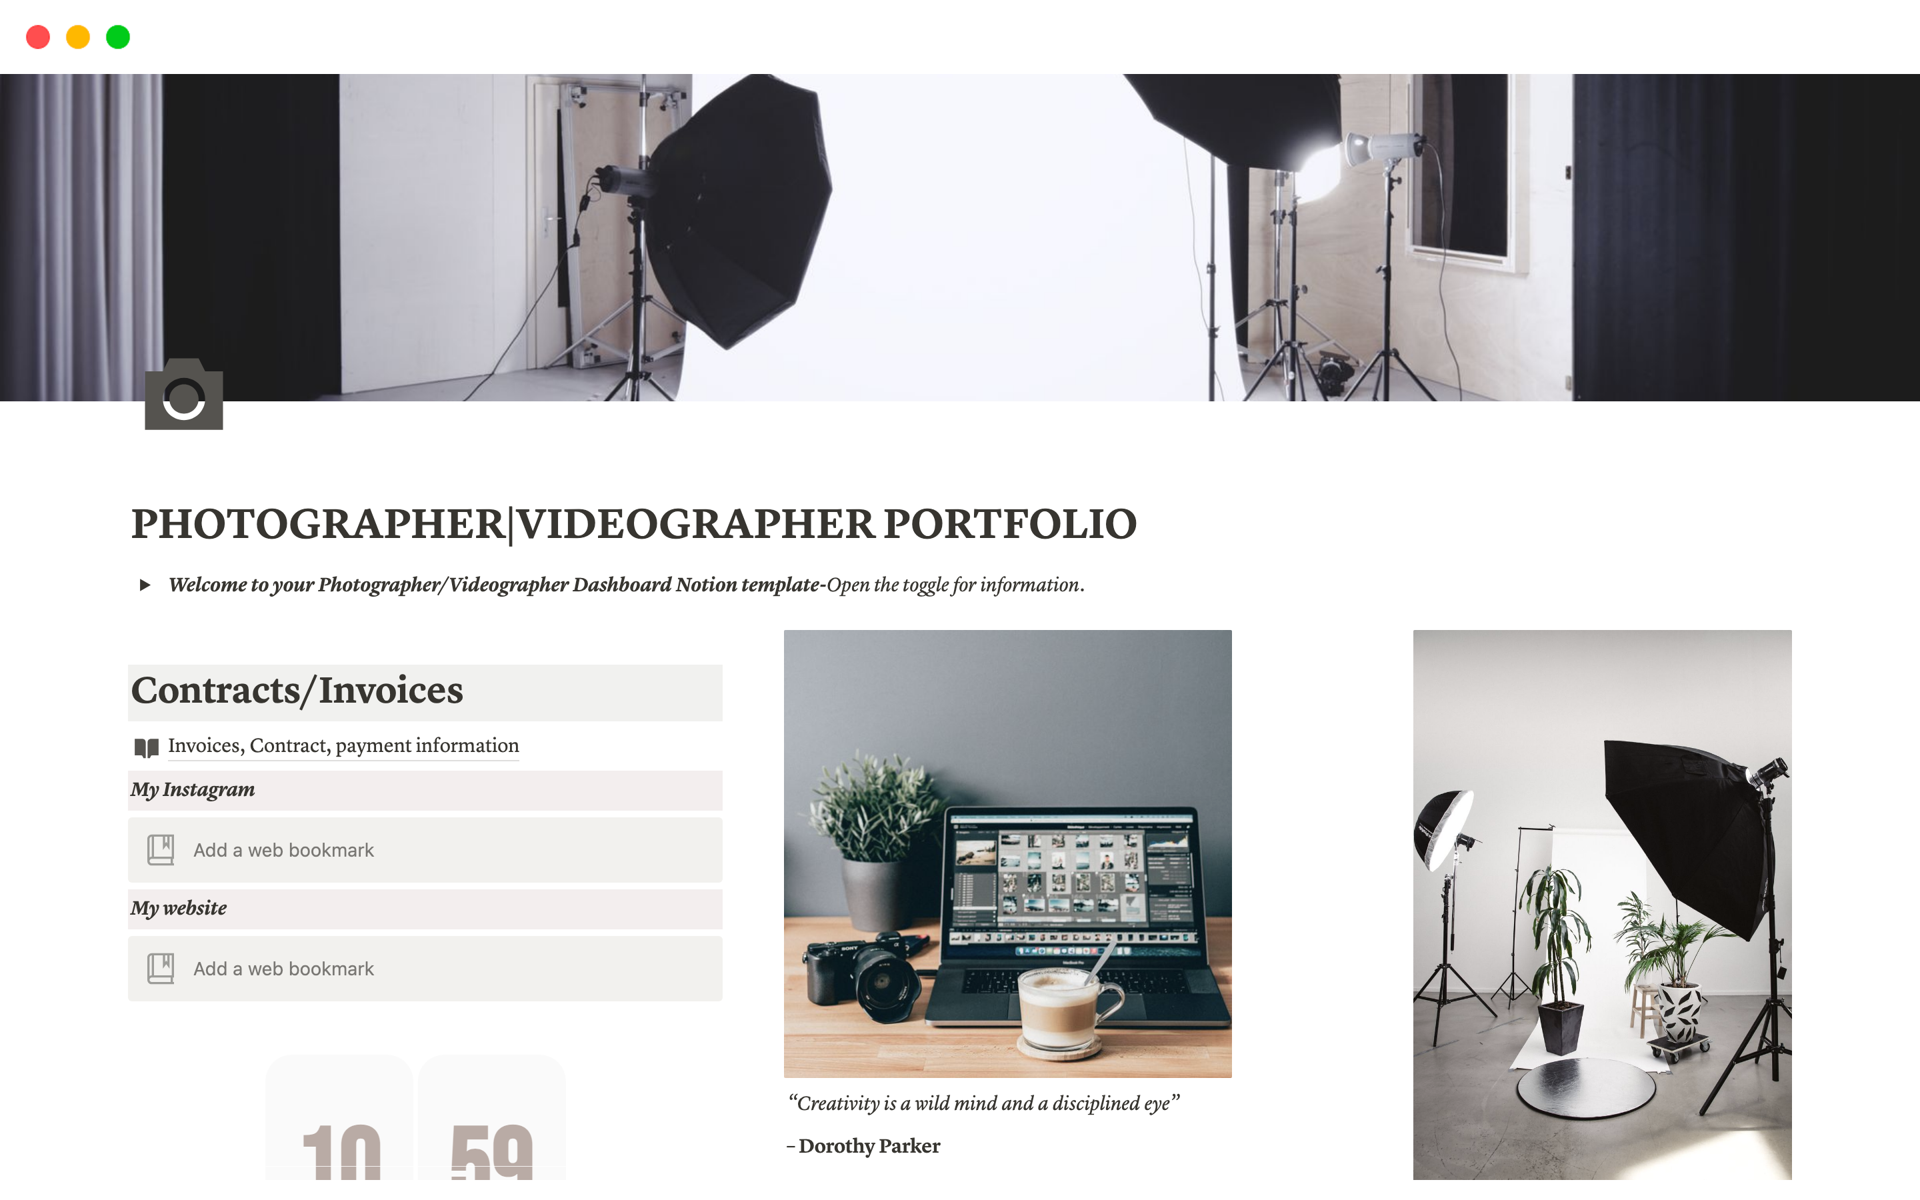 📸 Capture Life's Moments with Our Professional Photographer/Videographer Notion Template! 🎥

